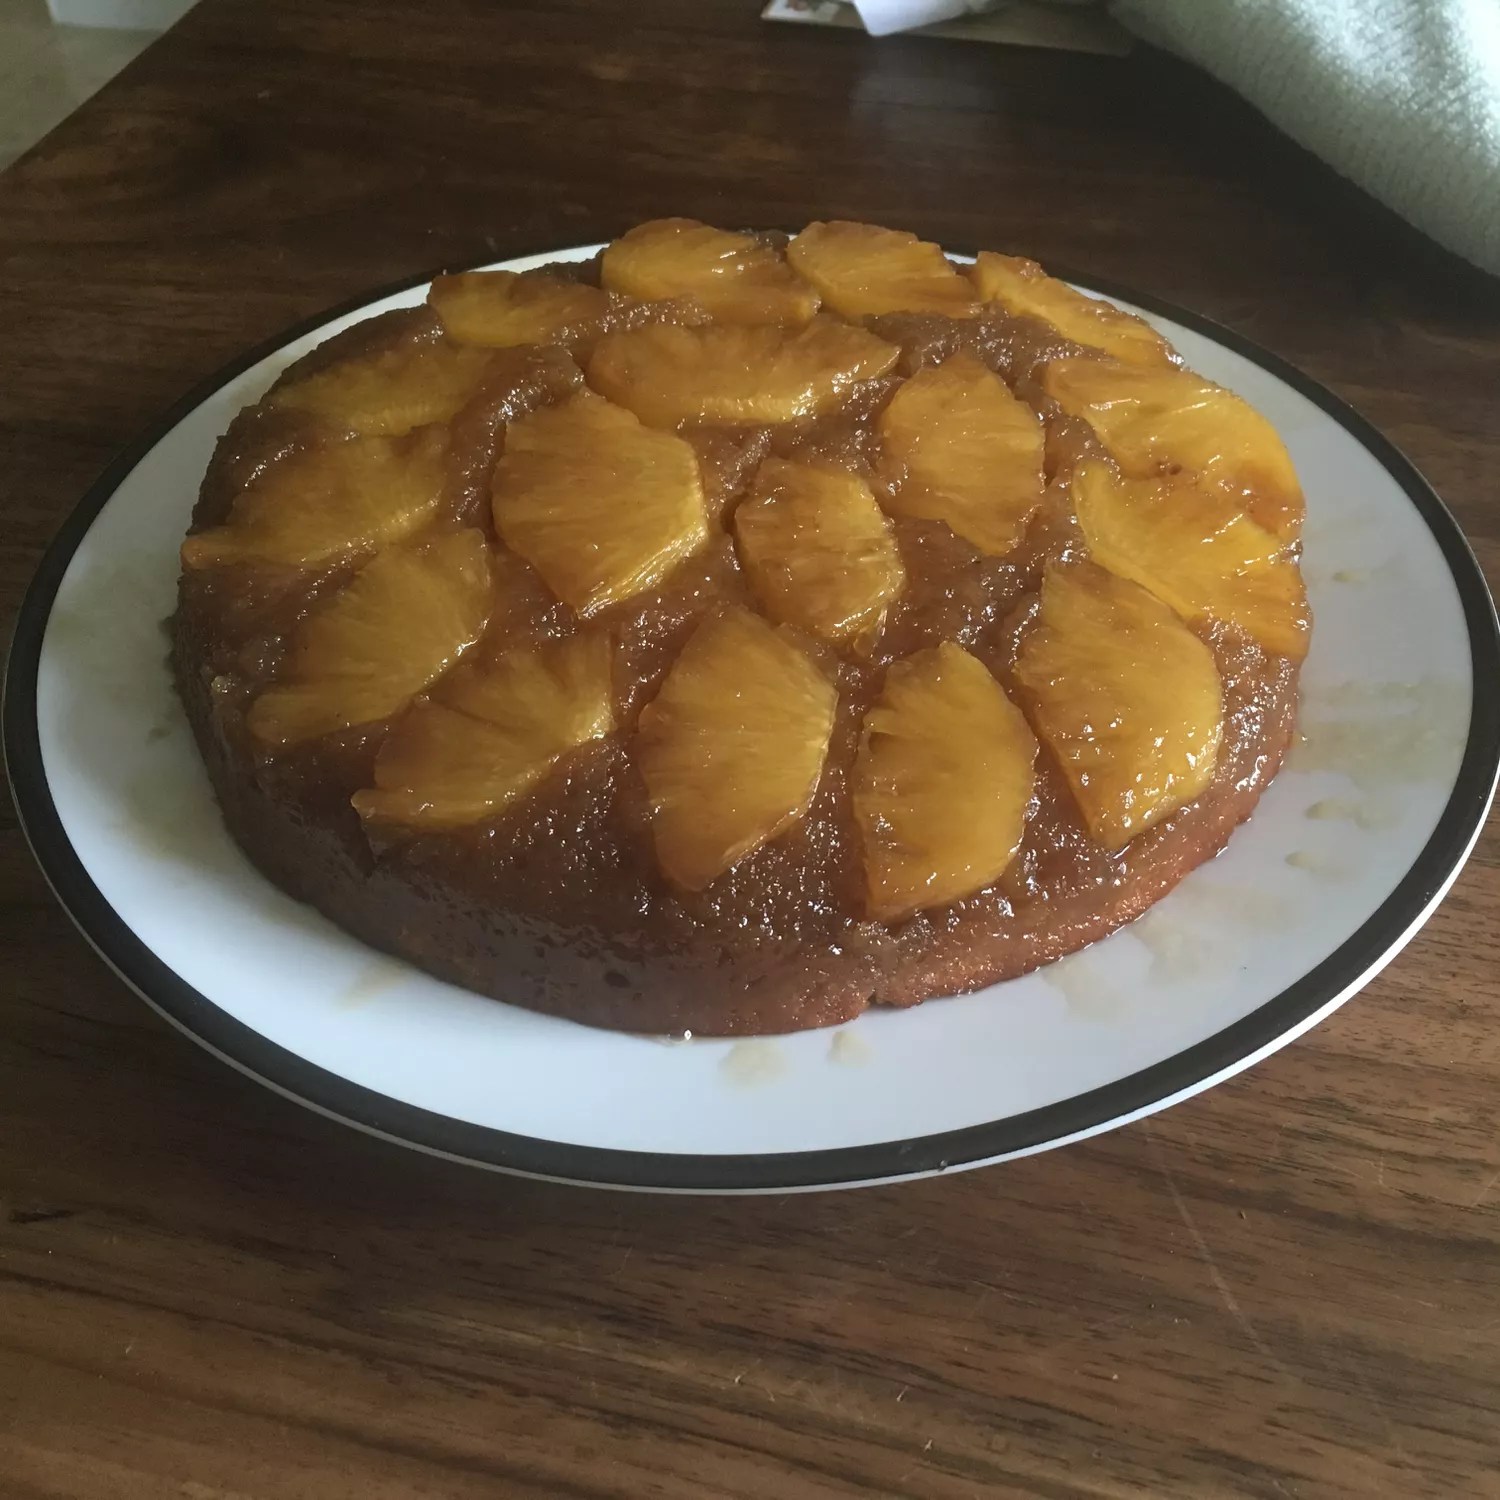 Get ready to drool: Chef John’s amazing Pineapple Upside-